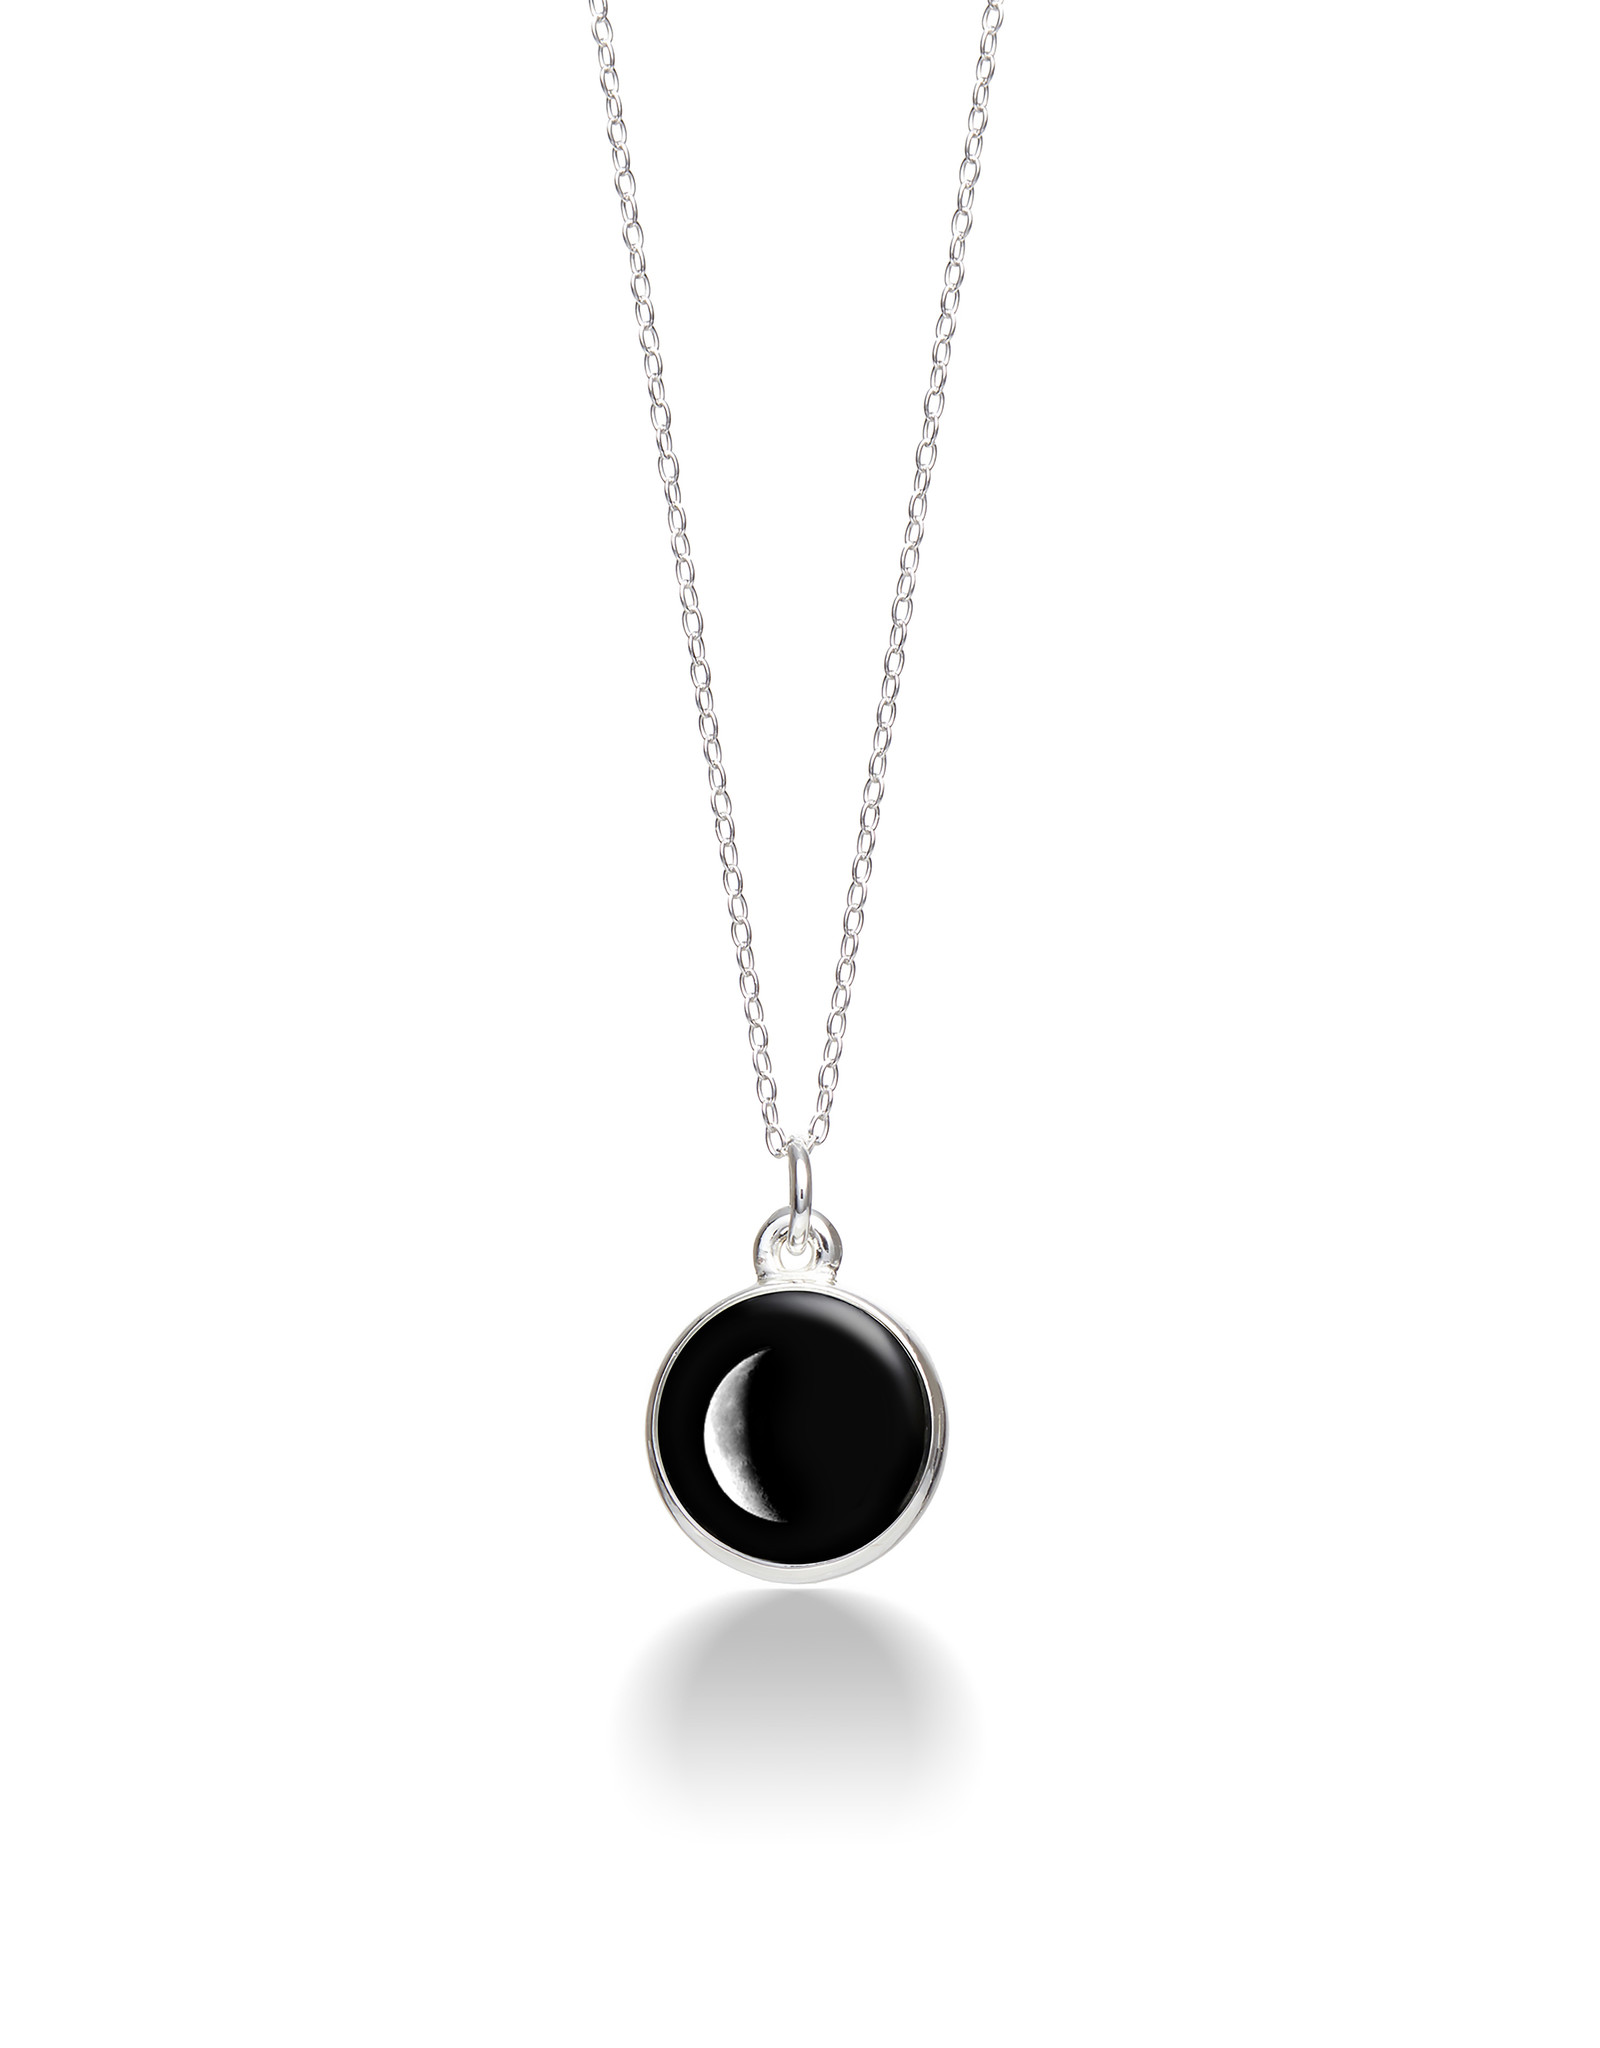 Moonglow Jewelry Moonglow Charmed Simplicity Necklace